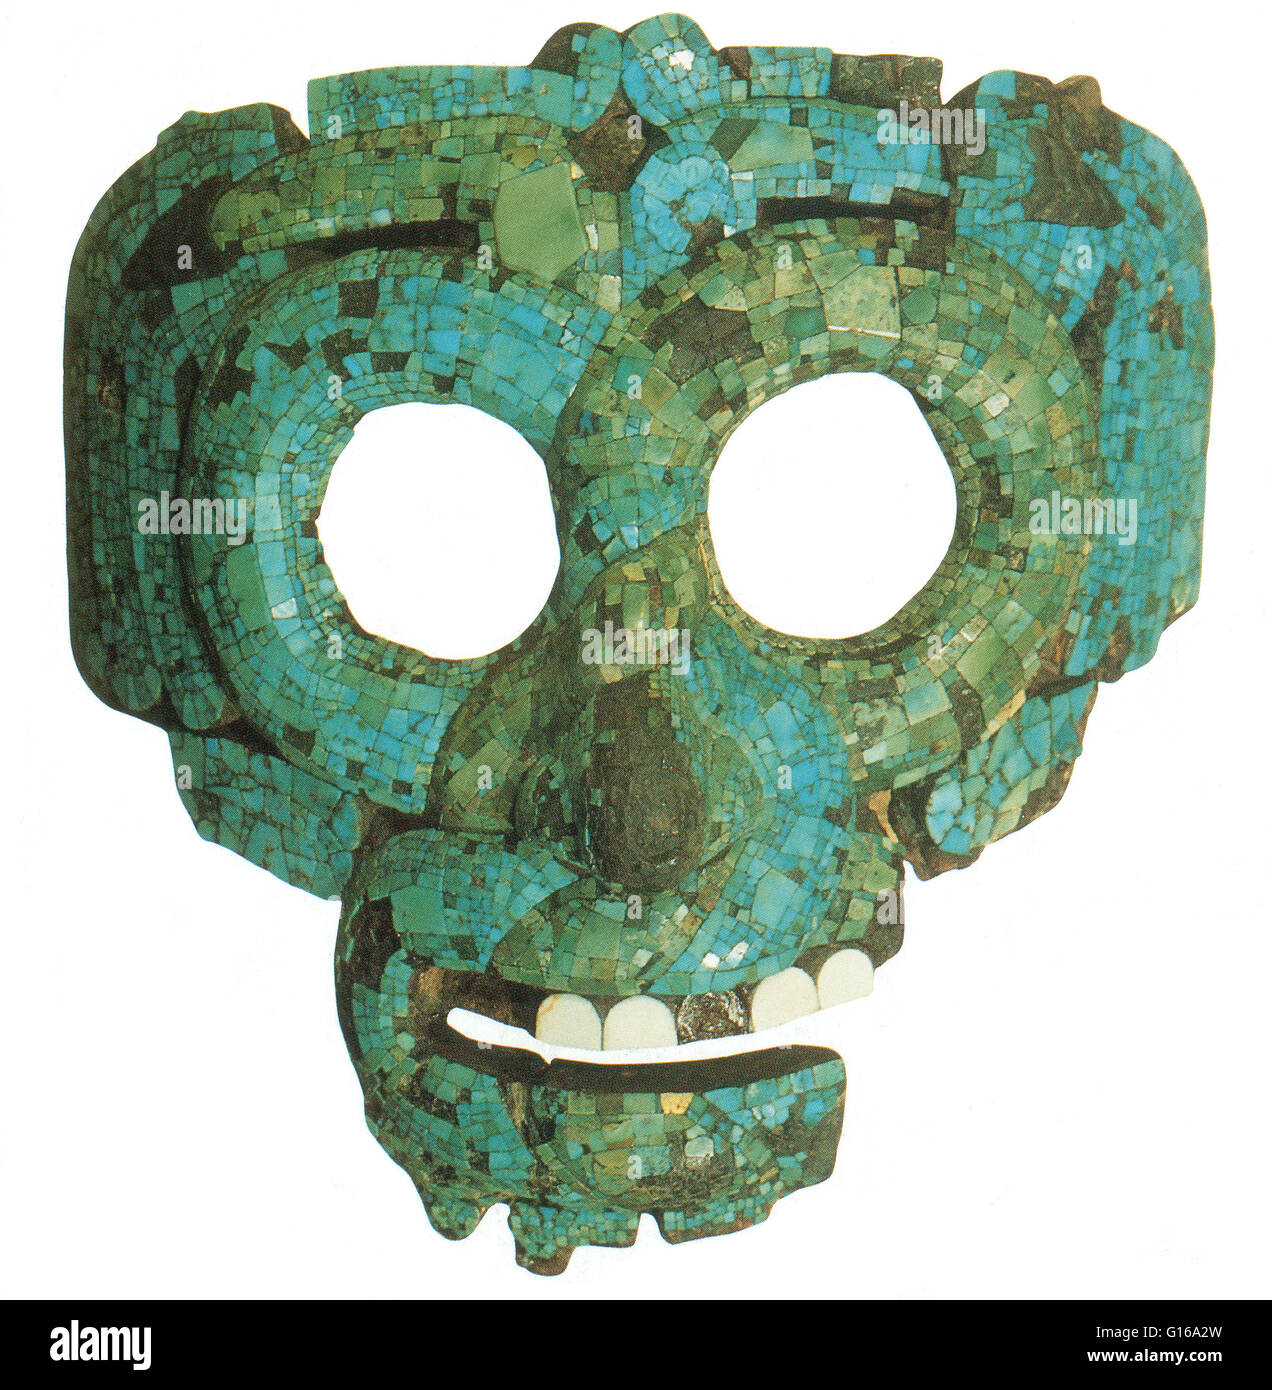 Turquoise mosaic mask of Quetzalcoatl, the feathered serpent. Quetzalcoatl is a Mesoamerican deity whose name comes from the Nahuatl language and has the meaning of 'feathered serpent'. Quetzalcoatl was related to gods of the wind, of Venus, of the dawn, Stock Photo